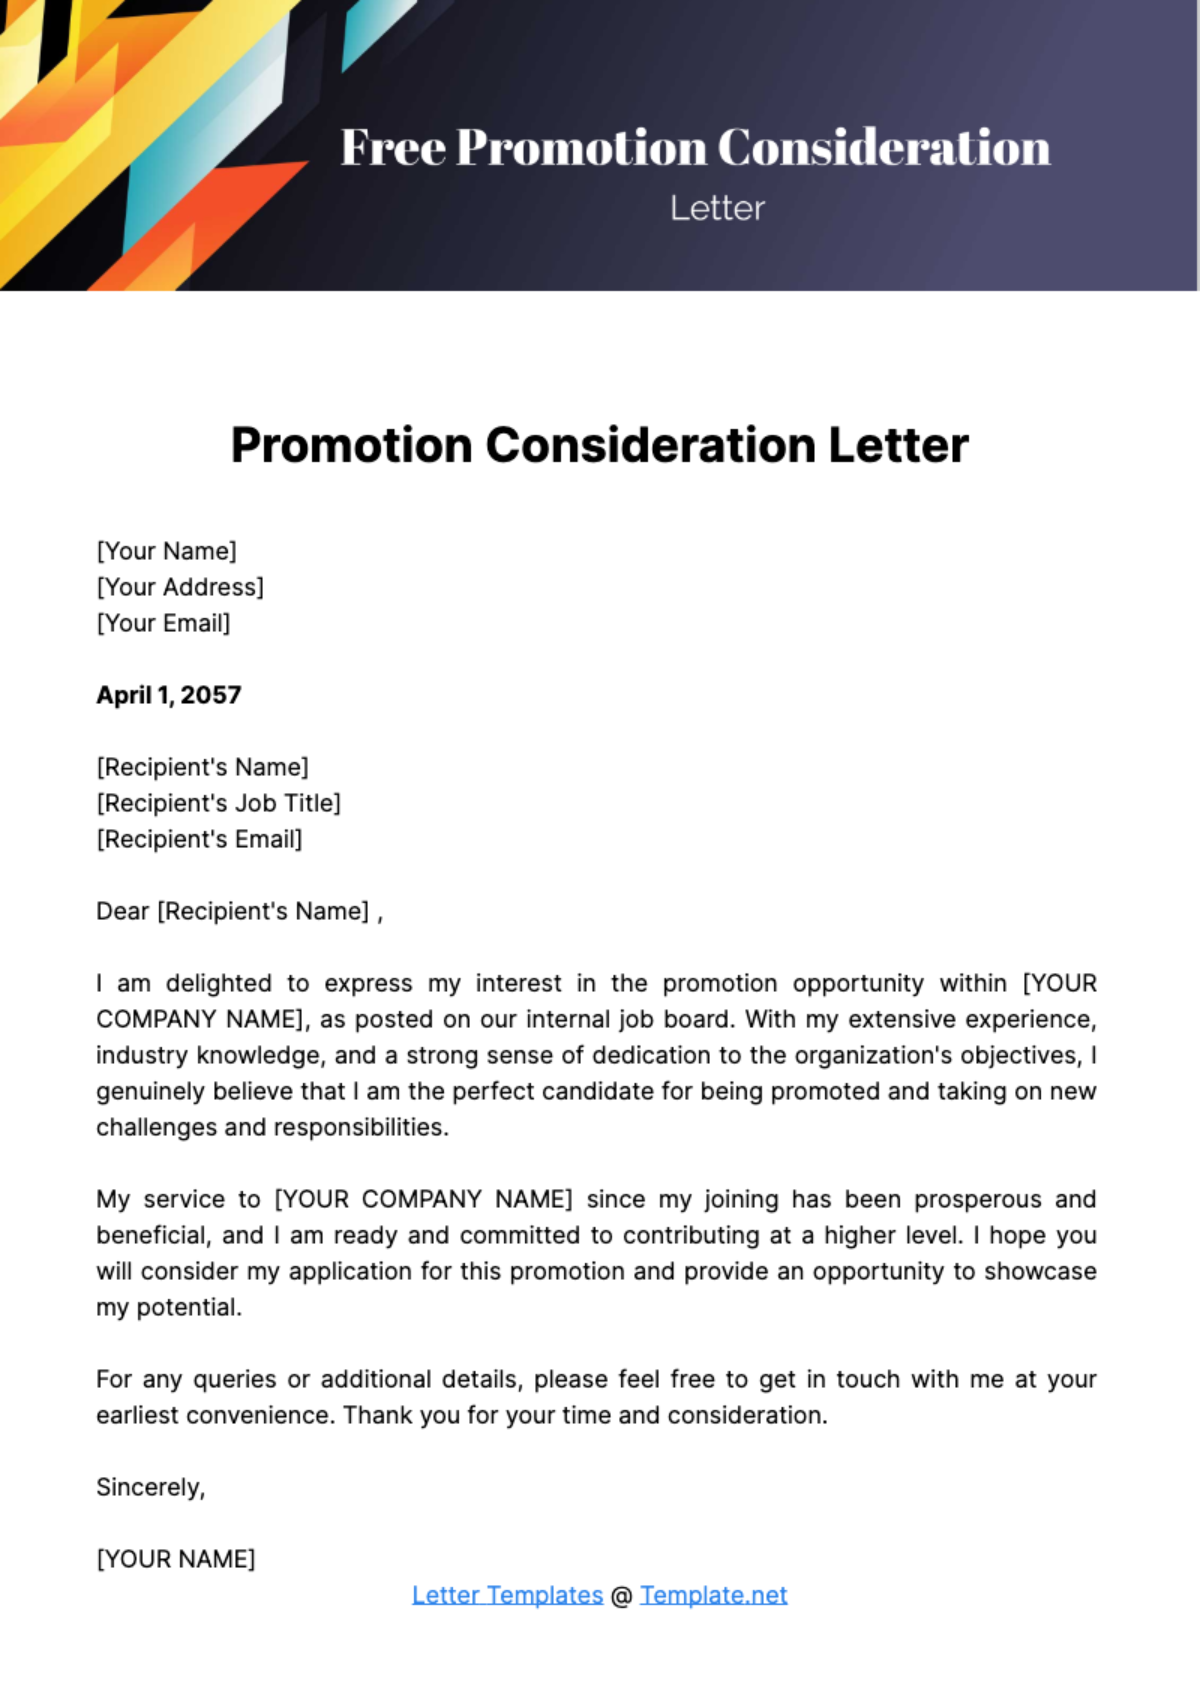 Free Promotion Consideration Letter Template